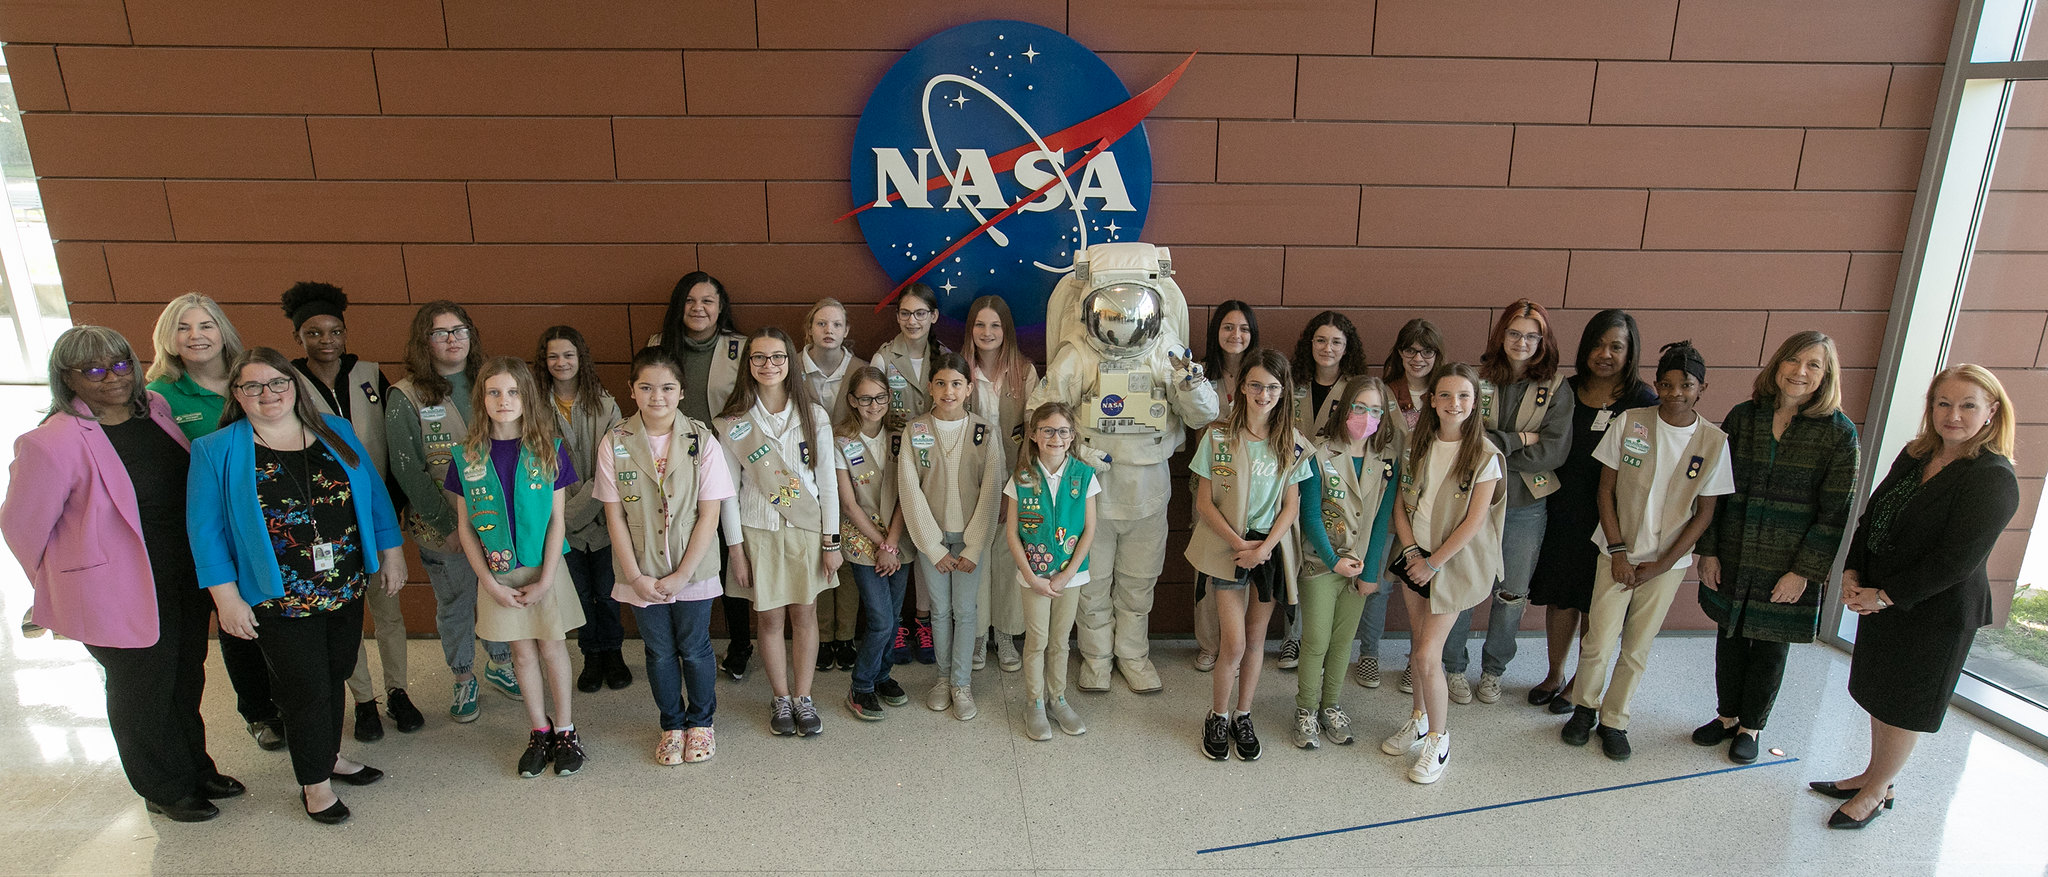 A group of girl scouts poses with a NASA Langley public relations specialist in an astronaut suit in front of a NASA sign.